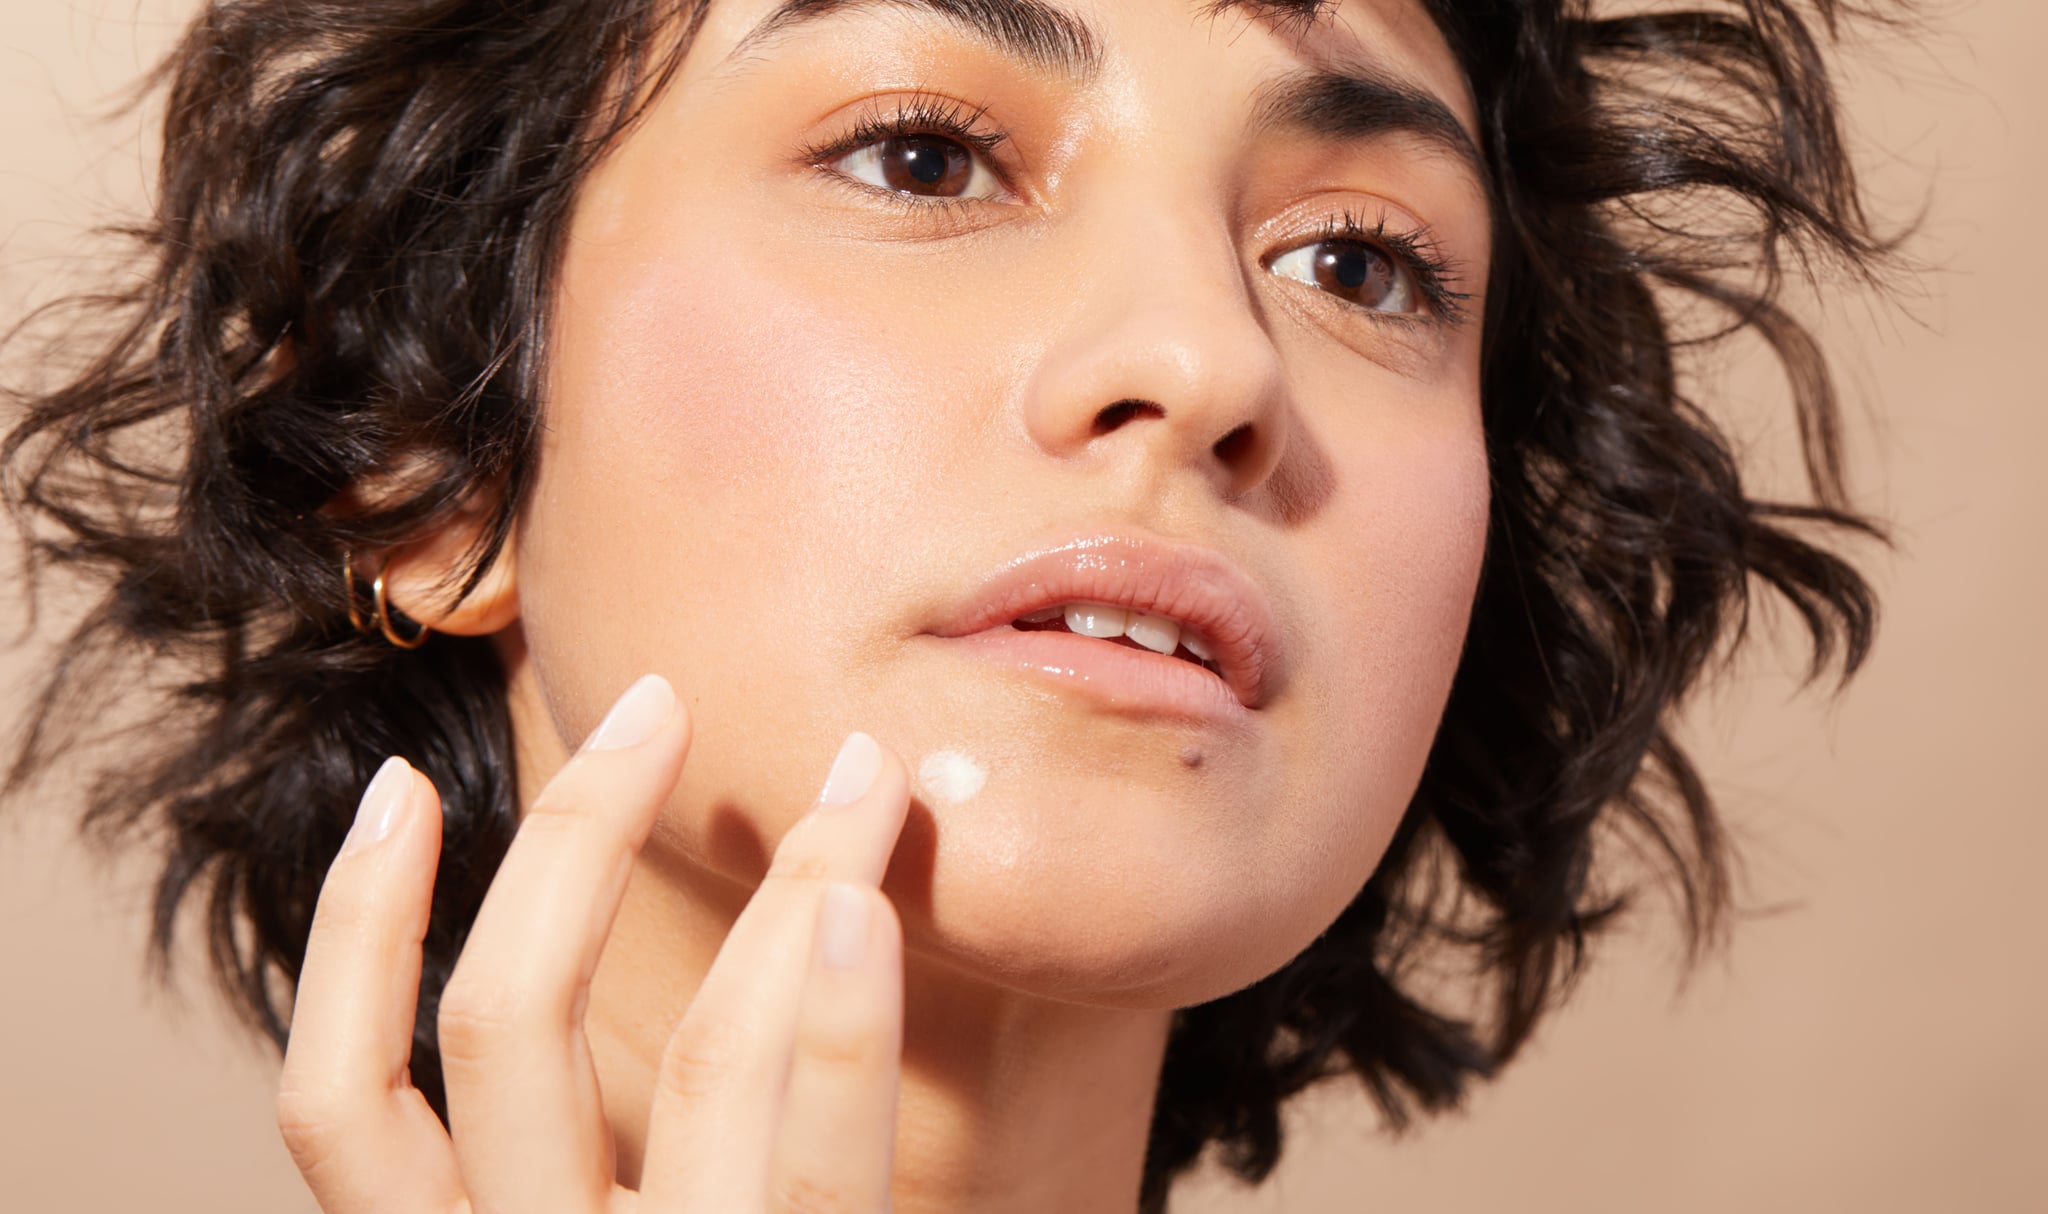 What is Aklief Cream? A Retinoid Now FDA Approved For Acne